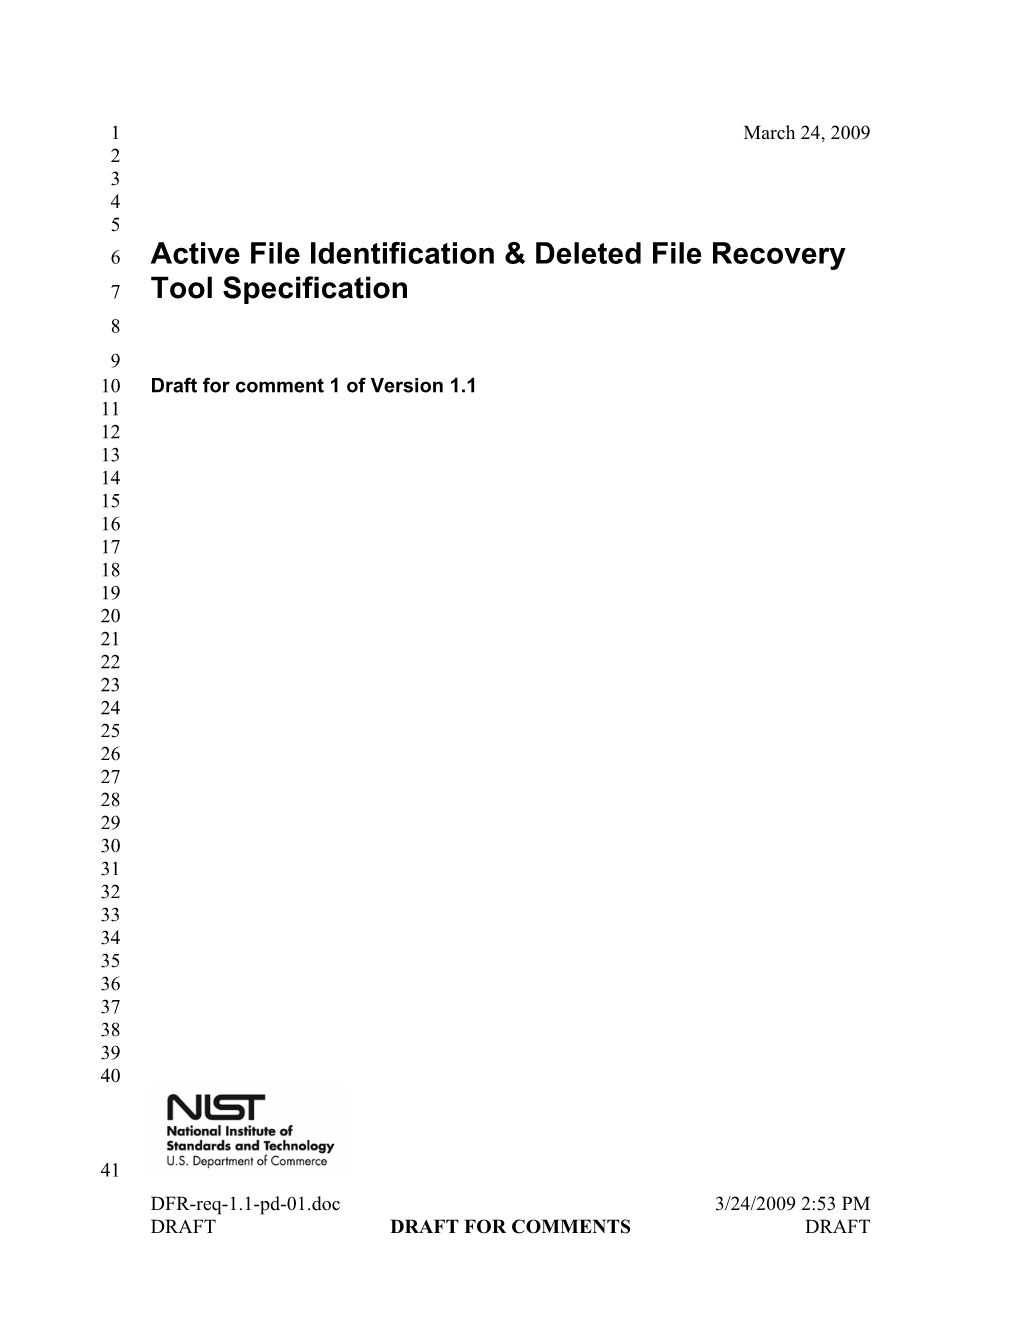 Active File Identification & Deleted File Recovery Tool Specification